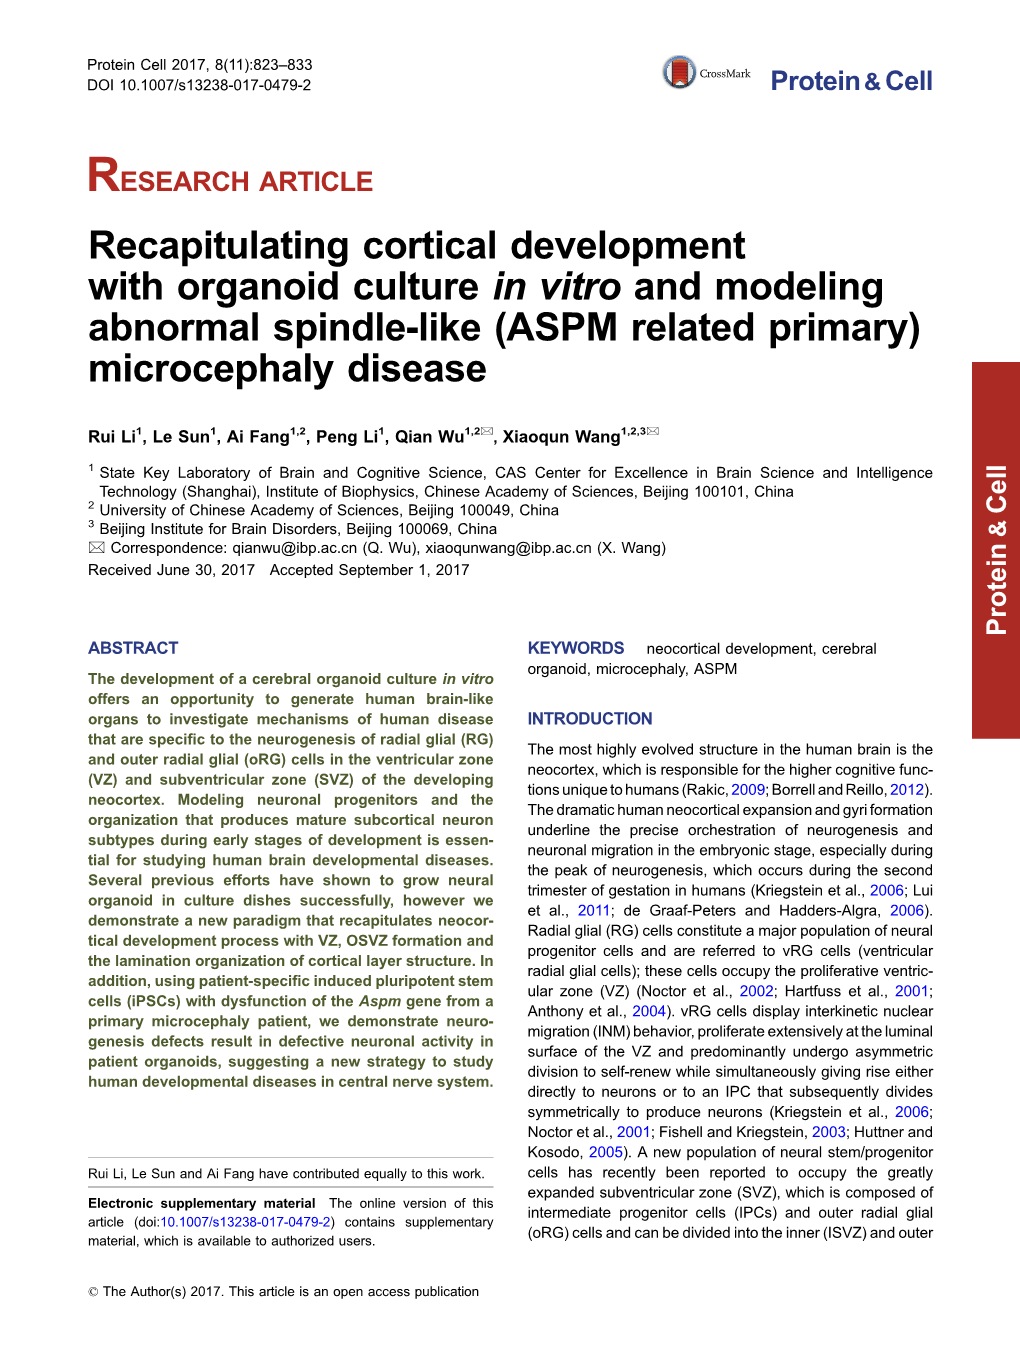 Recapitulating Cortical Development with Organoid Culture in Vitro and Modeling Abnormal Spindle-Like (ASPM Related Primary) Microcephaly Disease